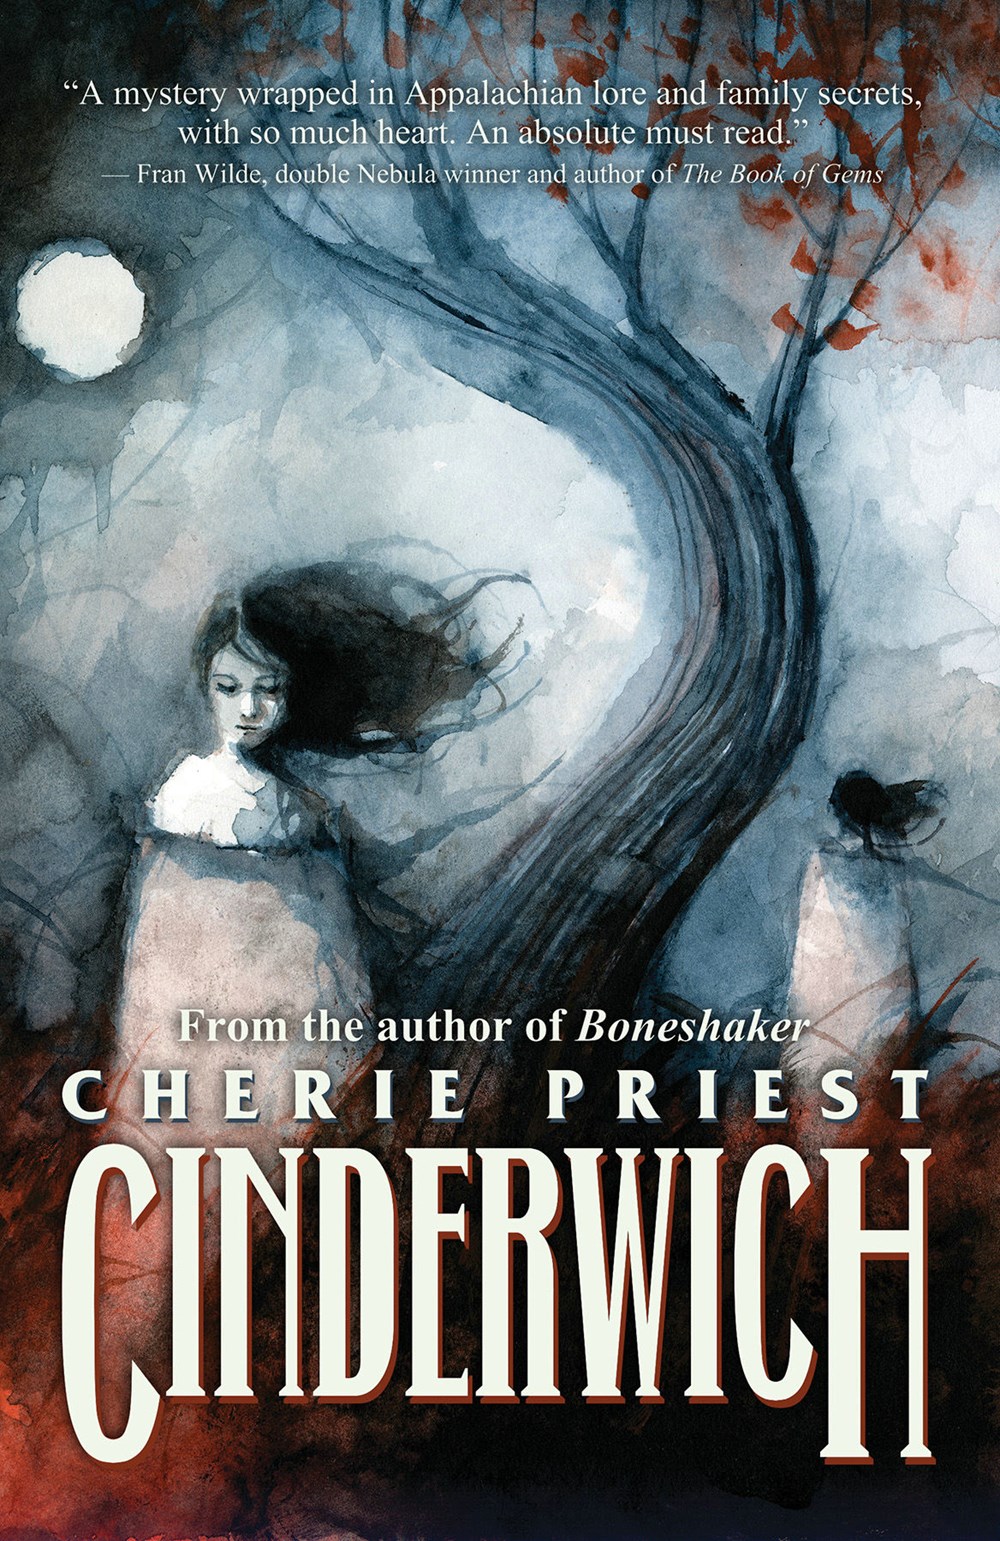 Author Chat with Cherie Priest (Cinderwich), Plus Giveaway~ US ONLY!